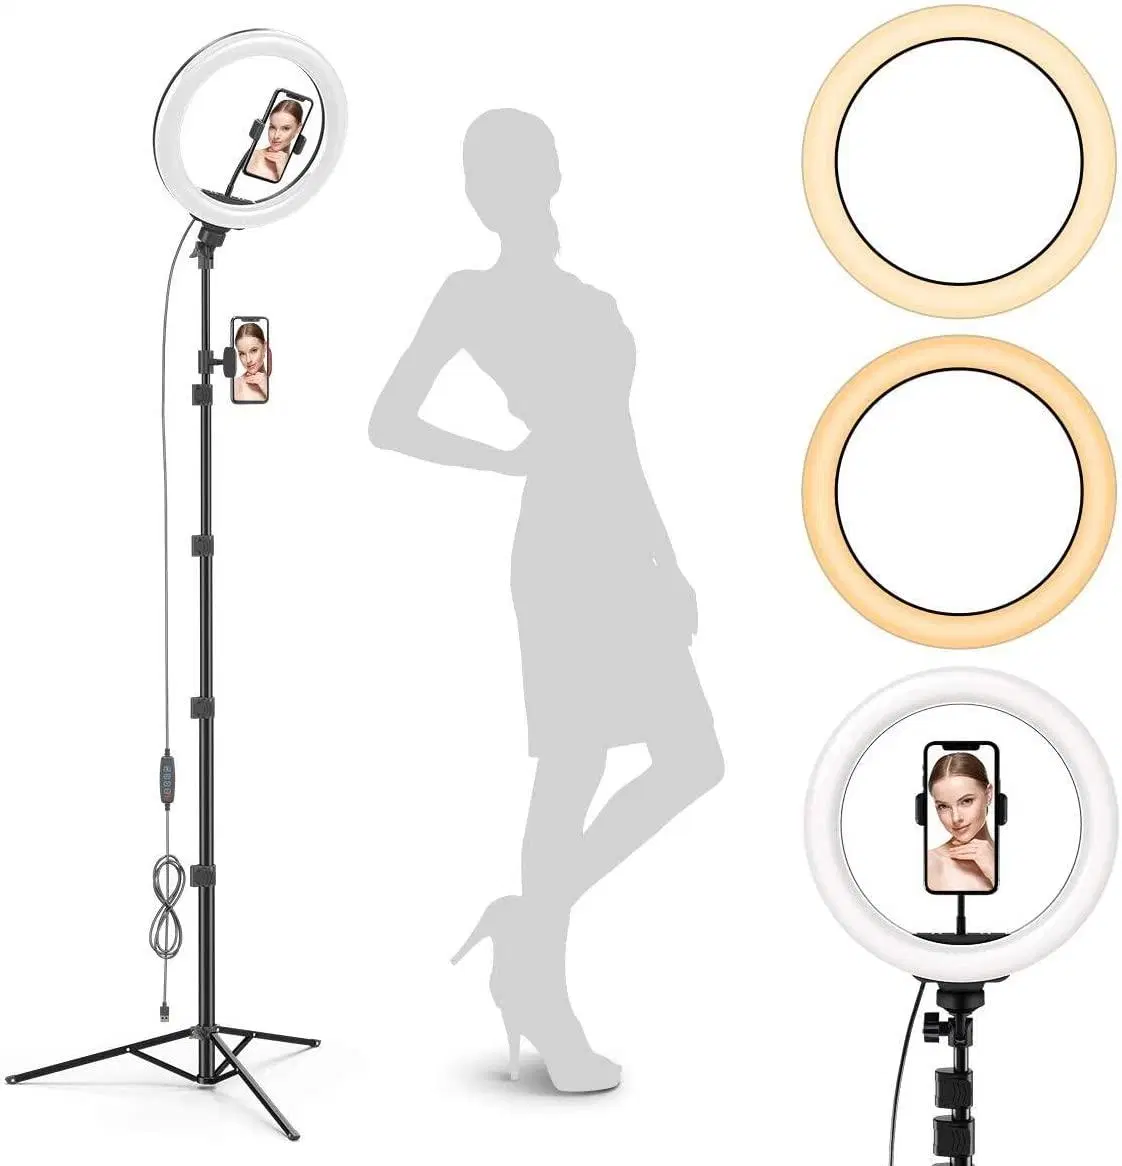 Selfie Tripod Stand with LED Lights, Dual Phone Holders, Adjustable Height and Lighting for Recording, Makeup & Photography